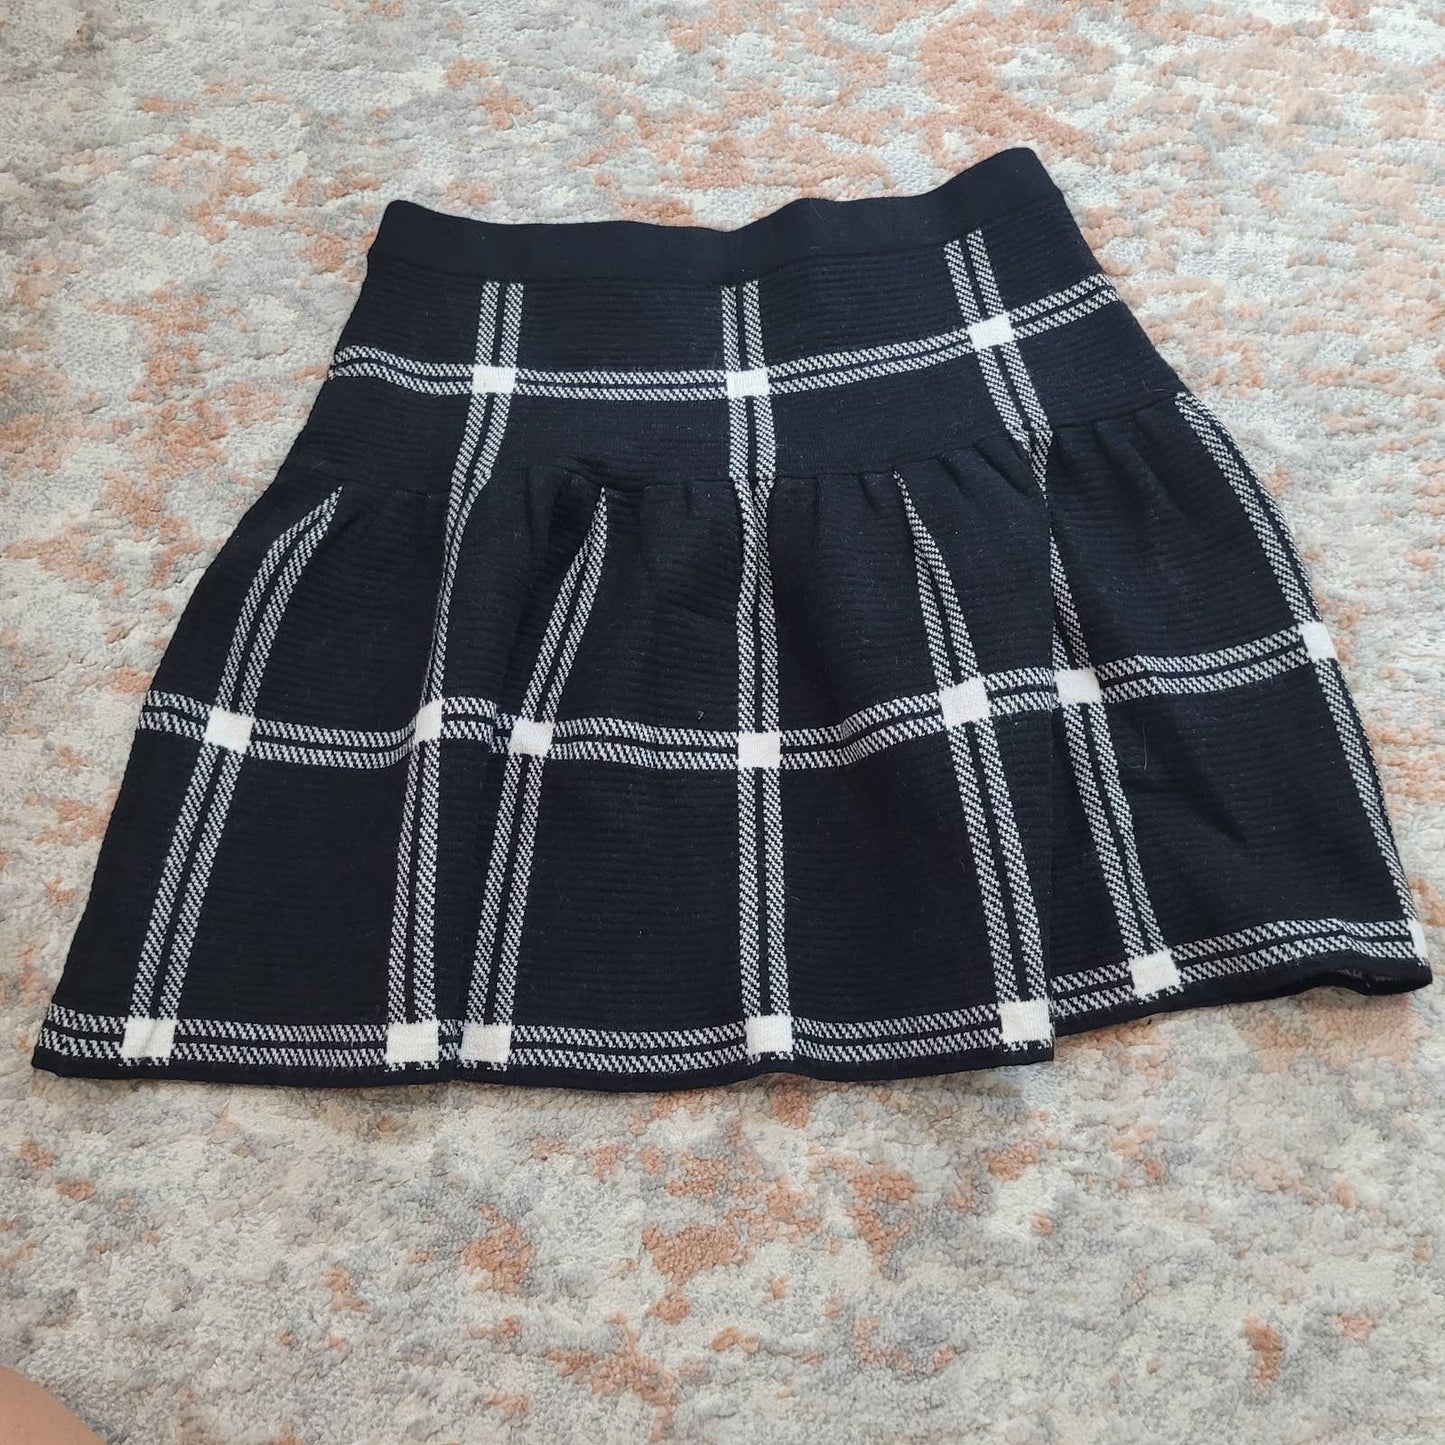 Cynthia Rowley Wool Blend Check Pleated Skirt - Size Small